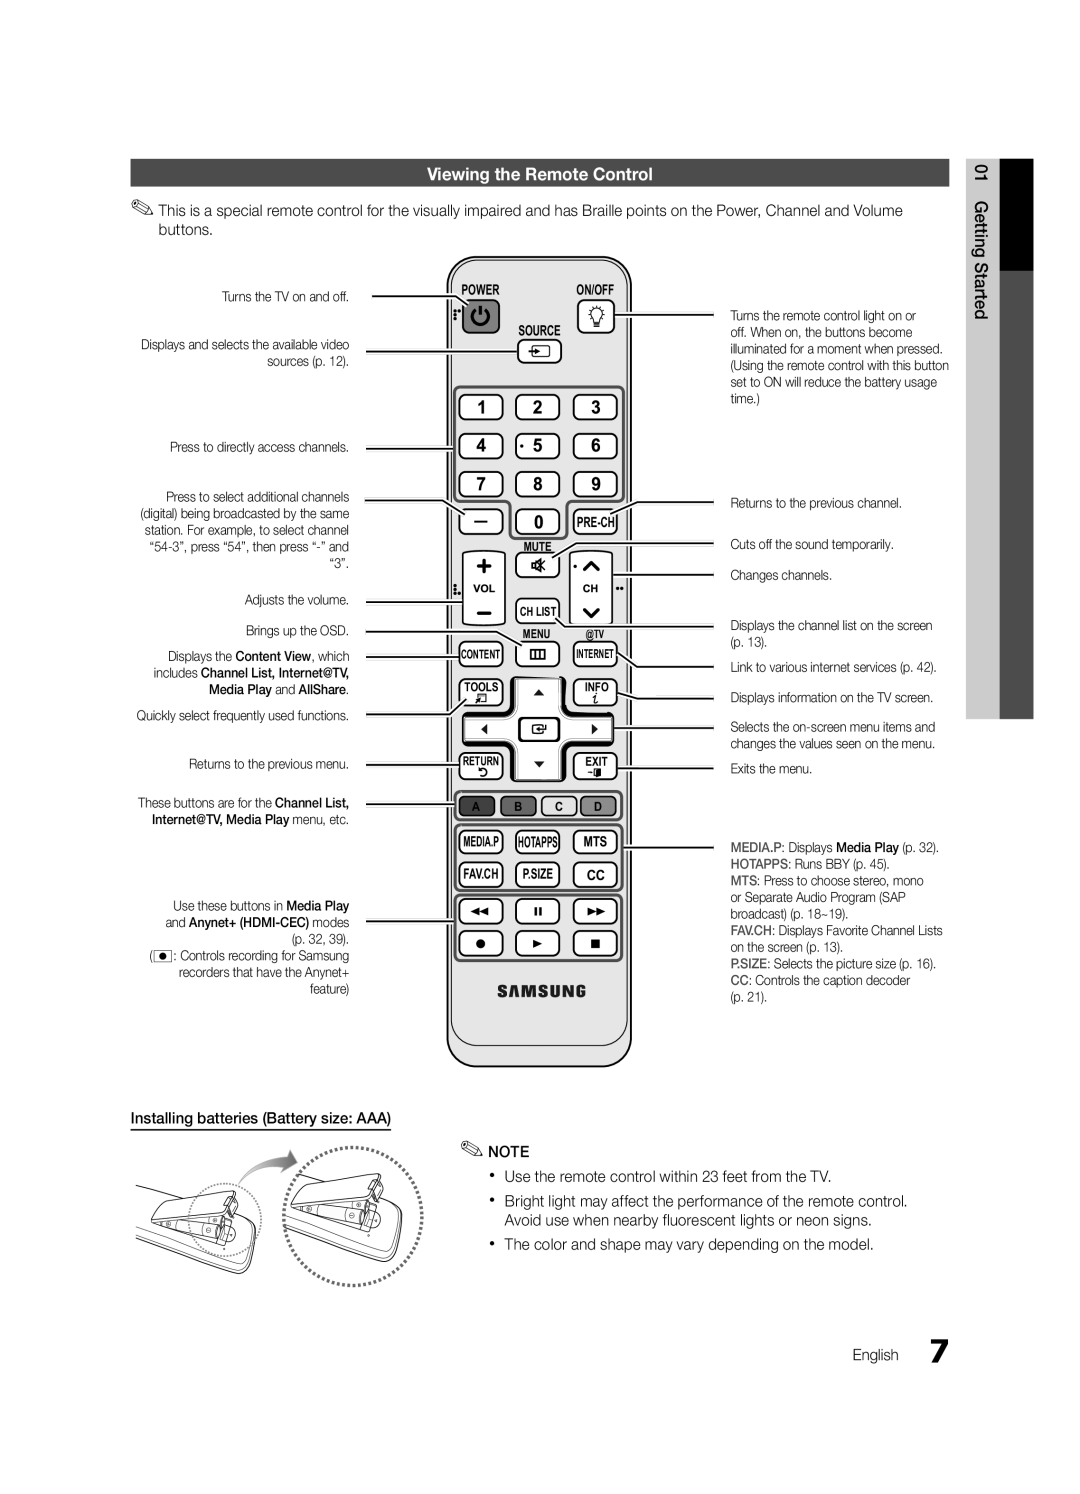 Samsung UN55C6900 Viewing the Remote Control, Started, Installing batteries Battery size AAA, Power On/Off Source 